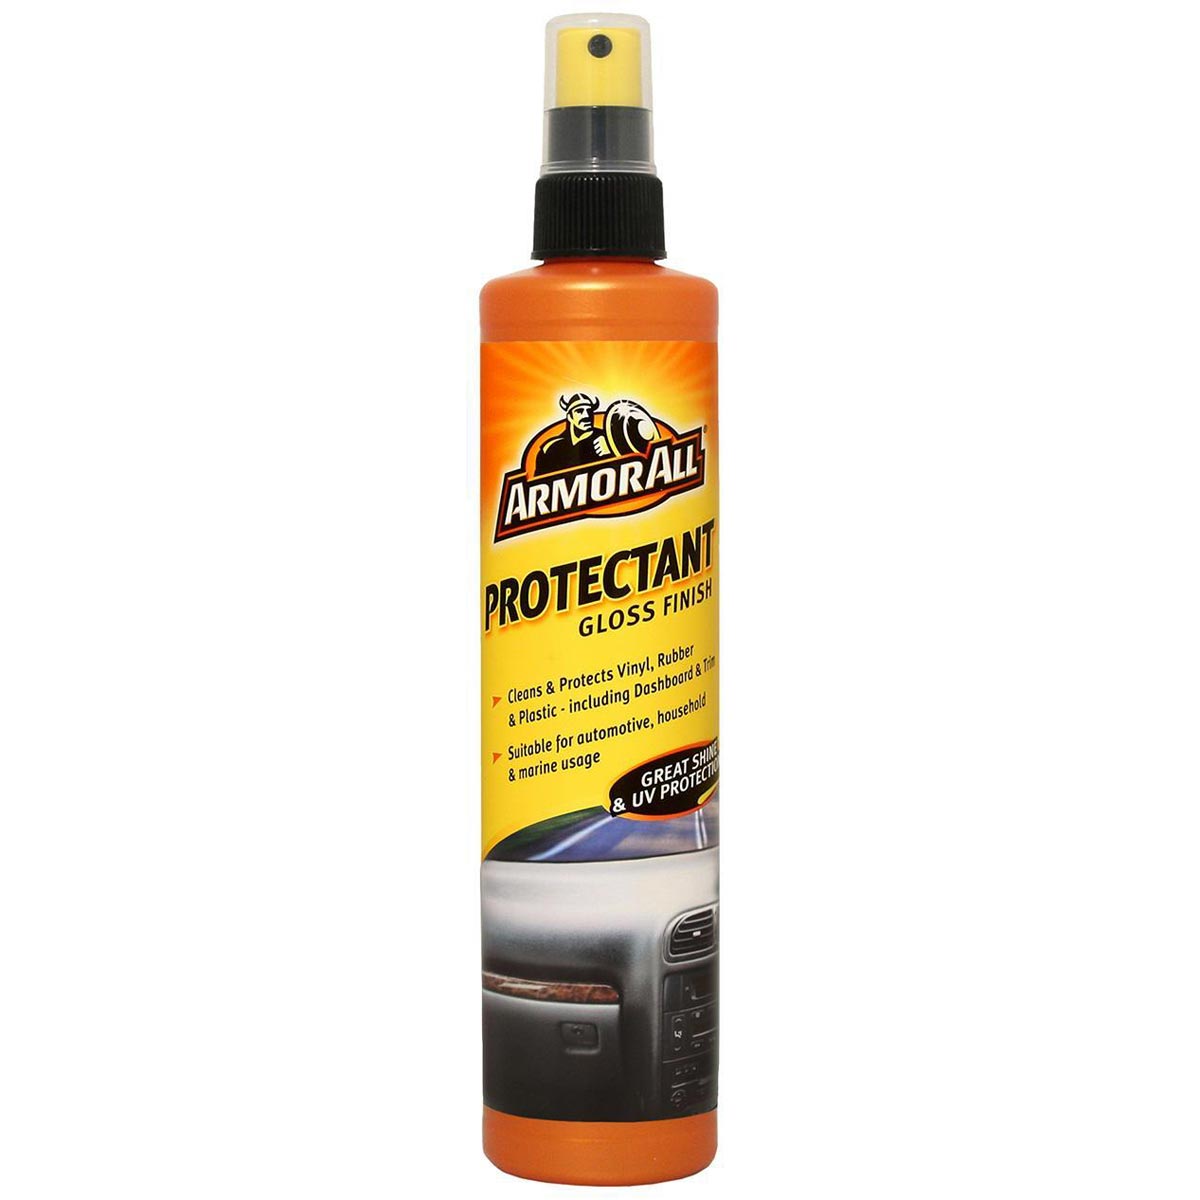 Armor All Protectant Gloss Finish 300ml Pump - Clear